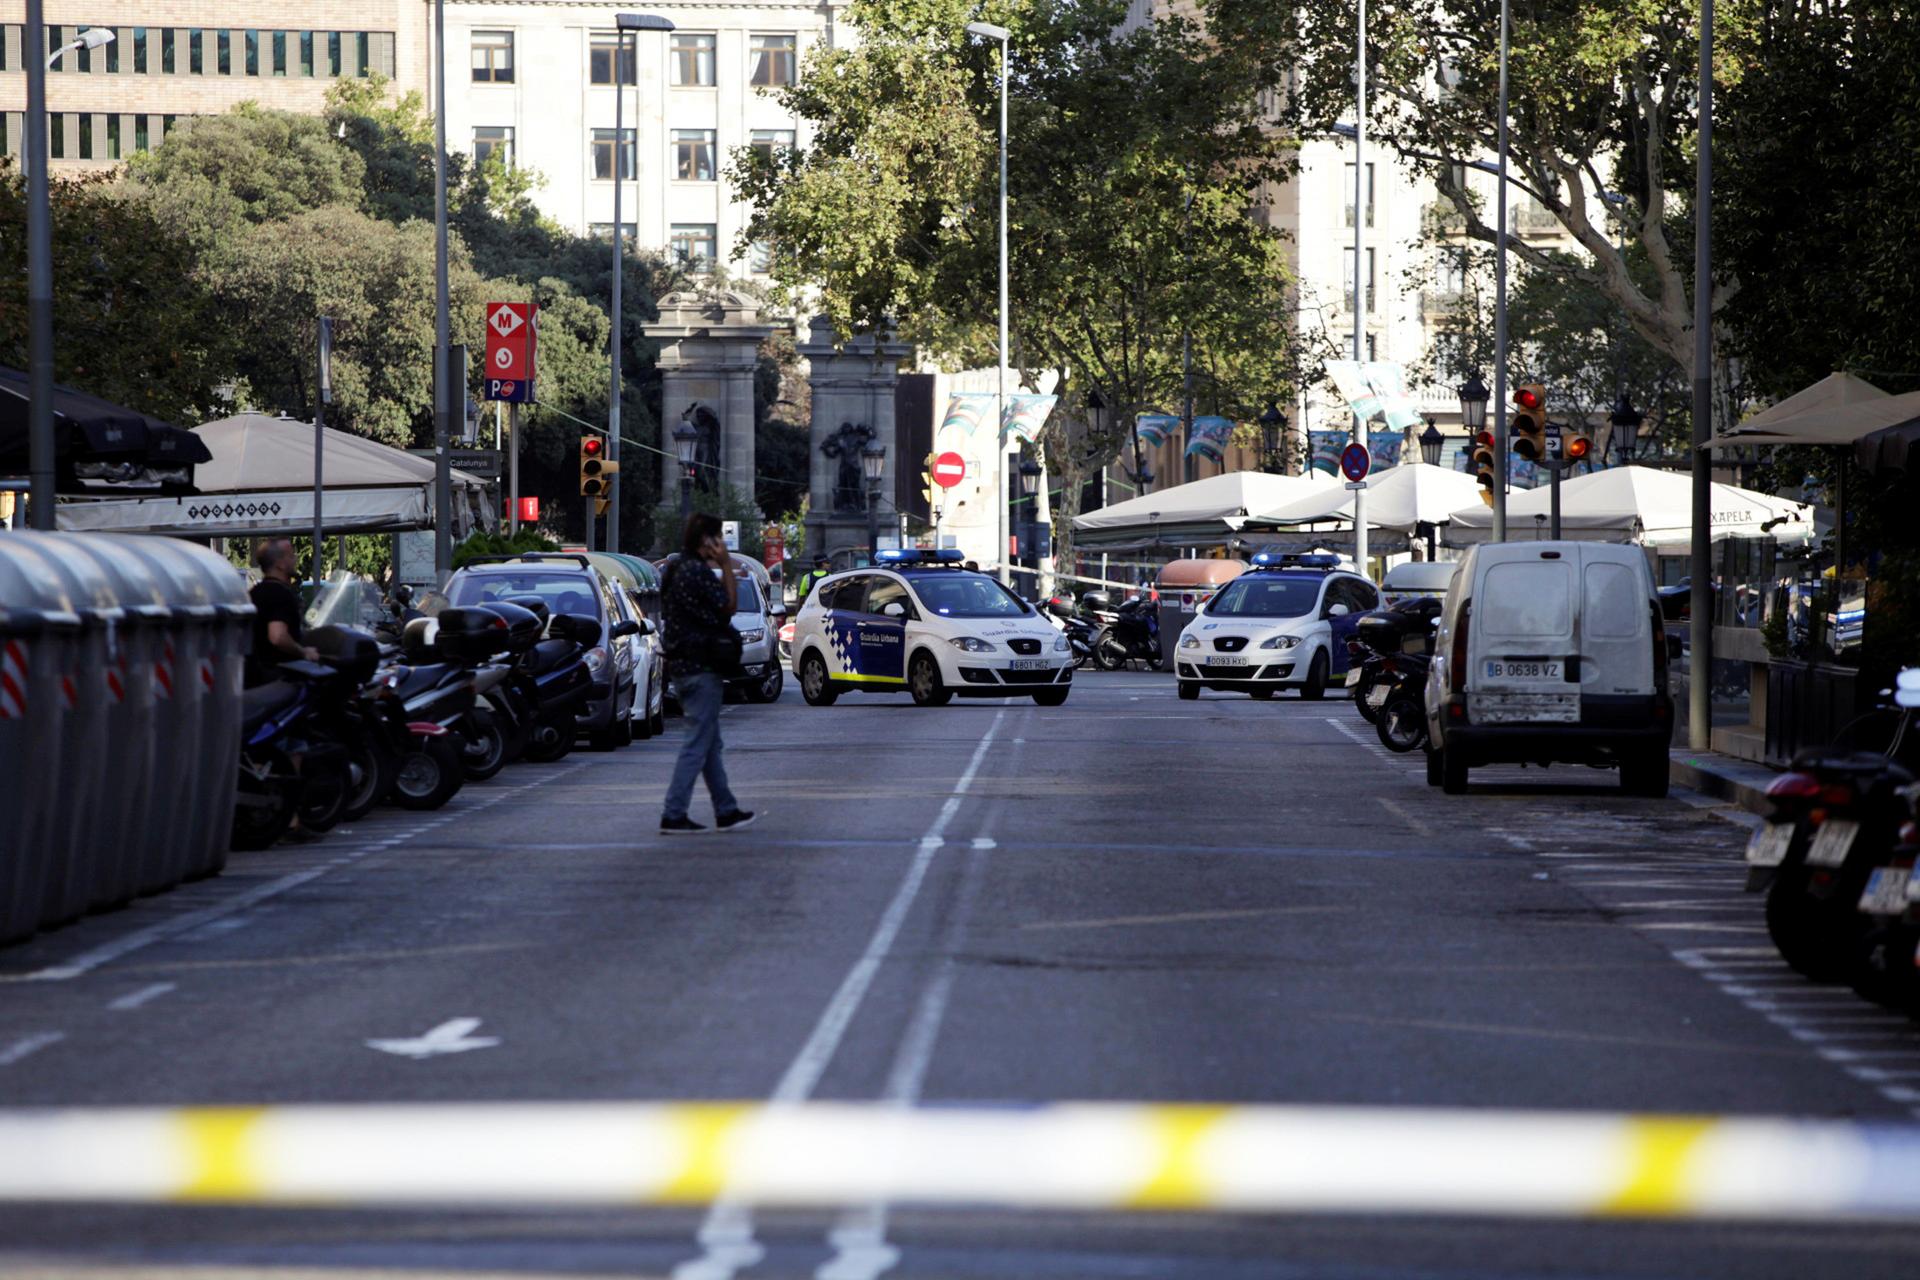 A street is cordoned off after a van crashed into pedestrians near the Las Ramblas avenue in central Barcelona, Spain August 17, 2017.